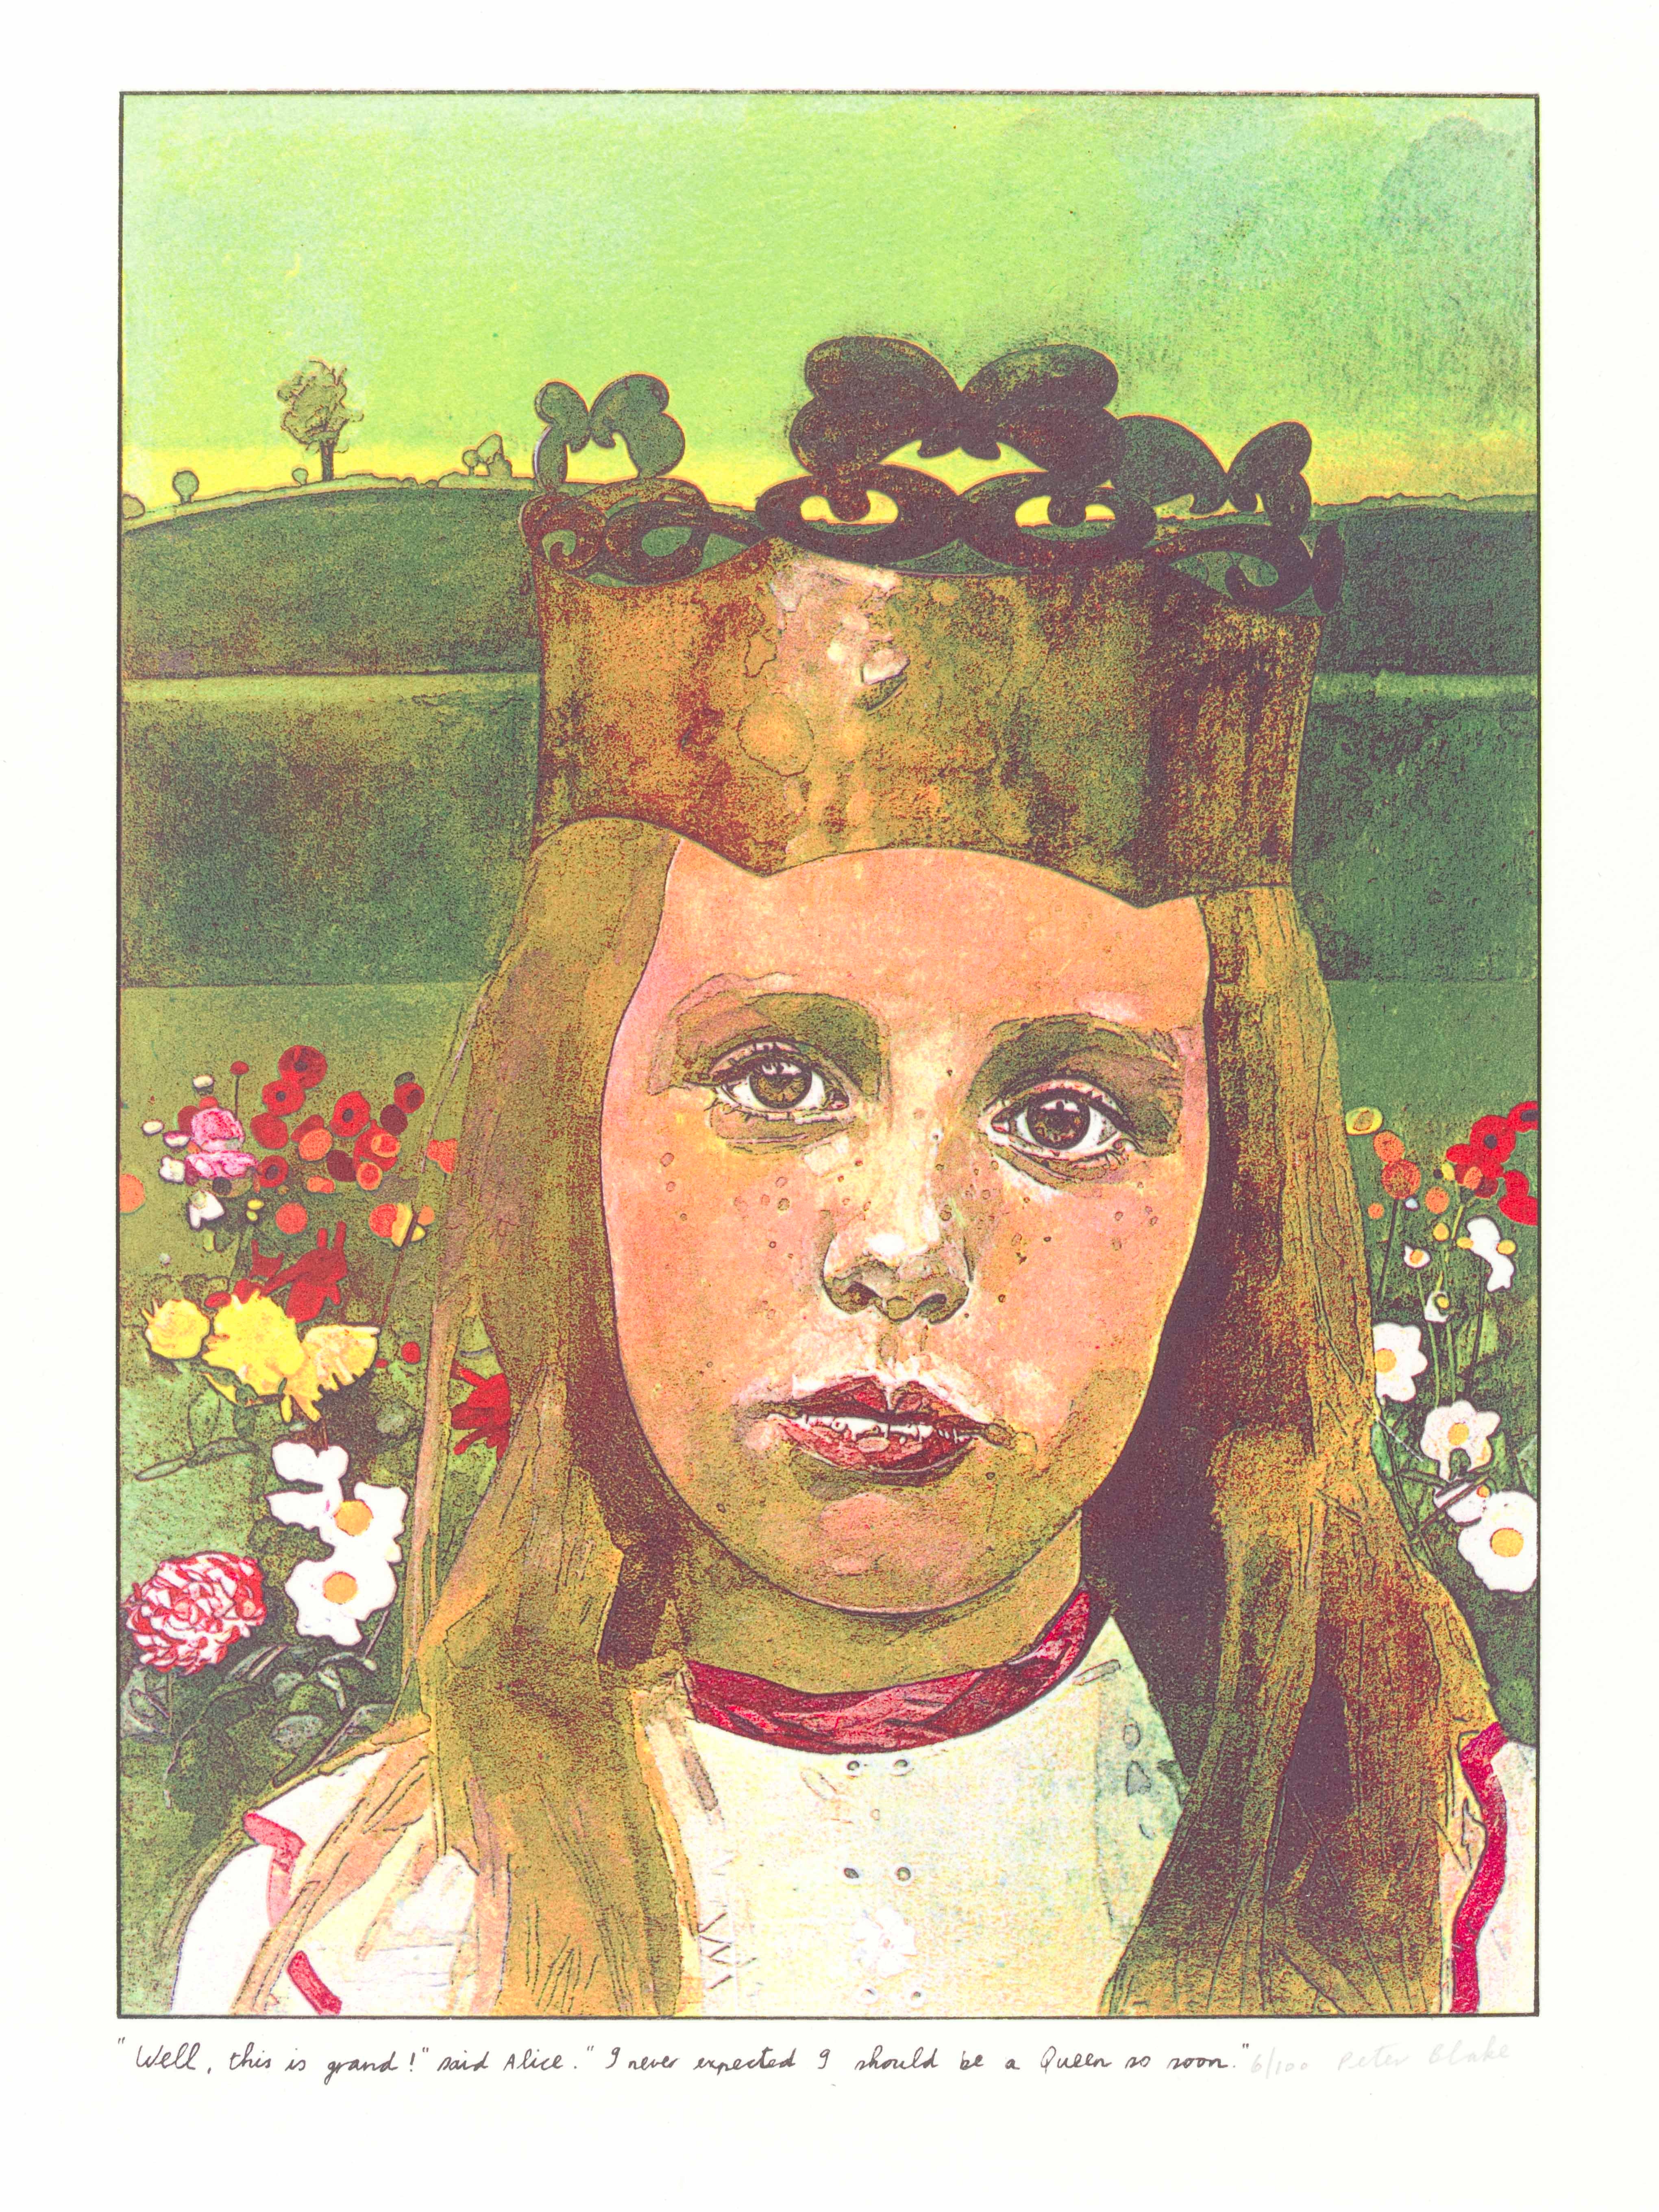 Print by Peter Blake from a suite illustrating ‘Through the Looking Glass and What Alice Found There’, 1970